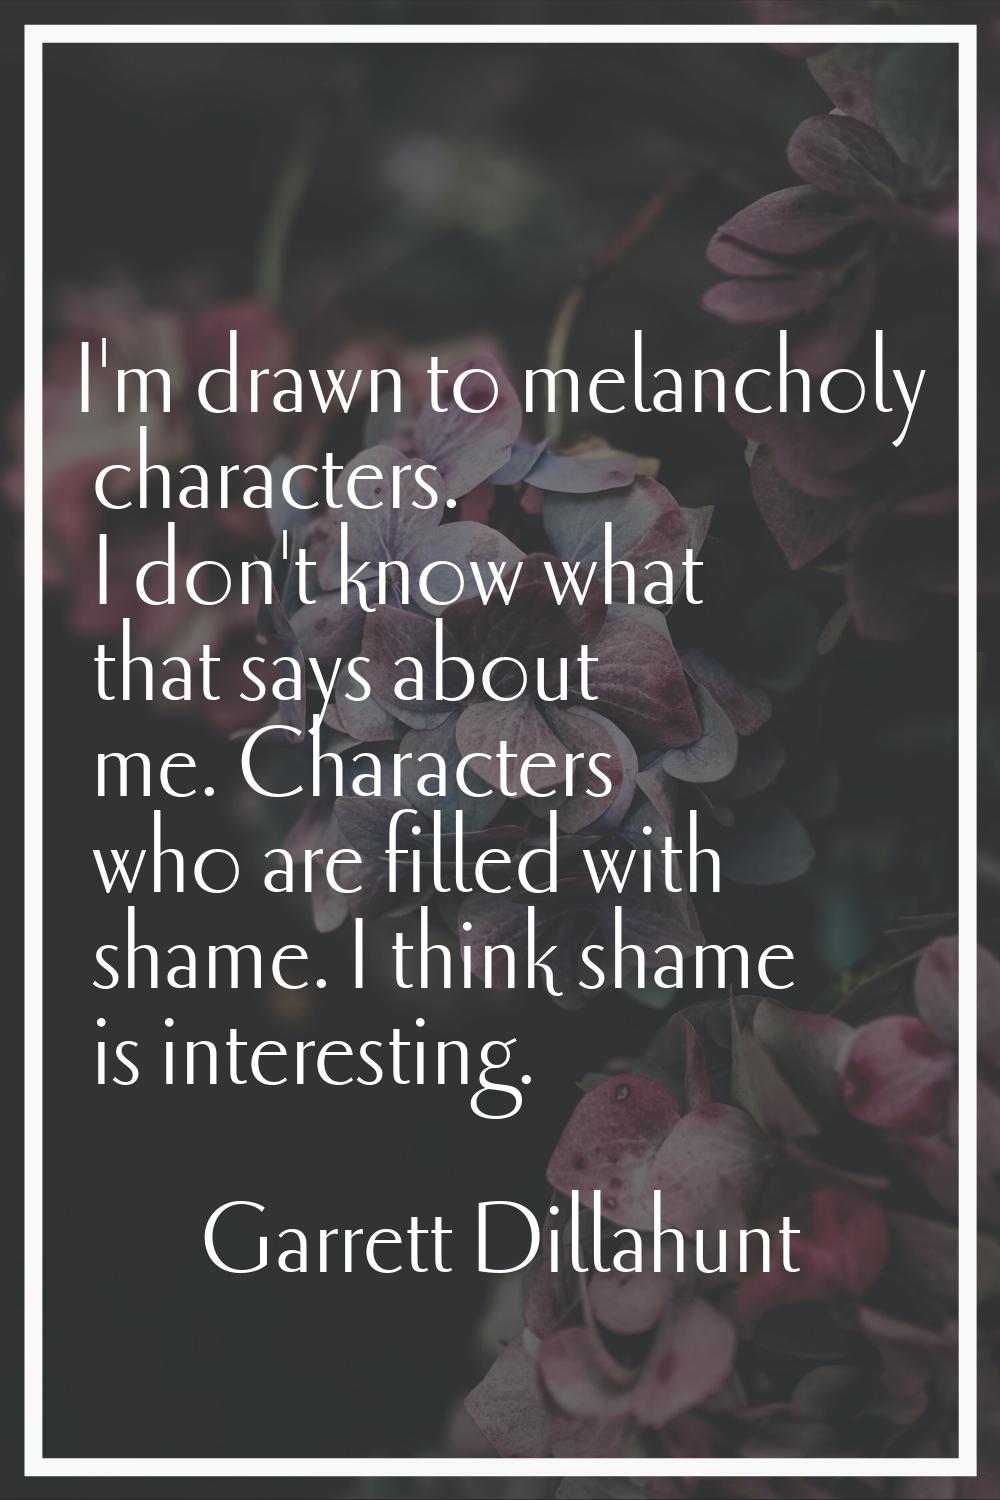 I'm drawn to melancholy characters. I don't know what that says about me. Characters who are filled